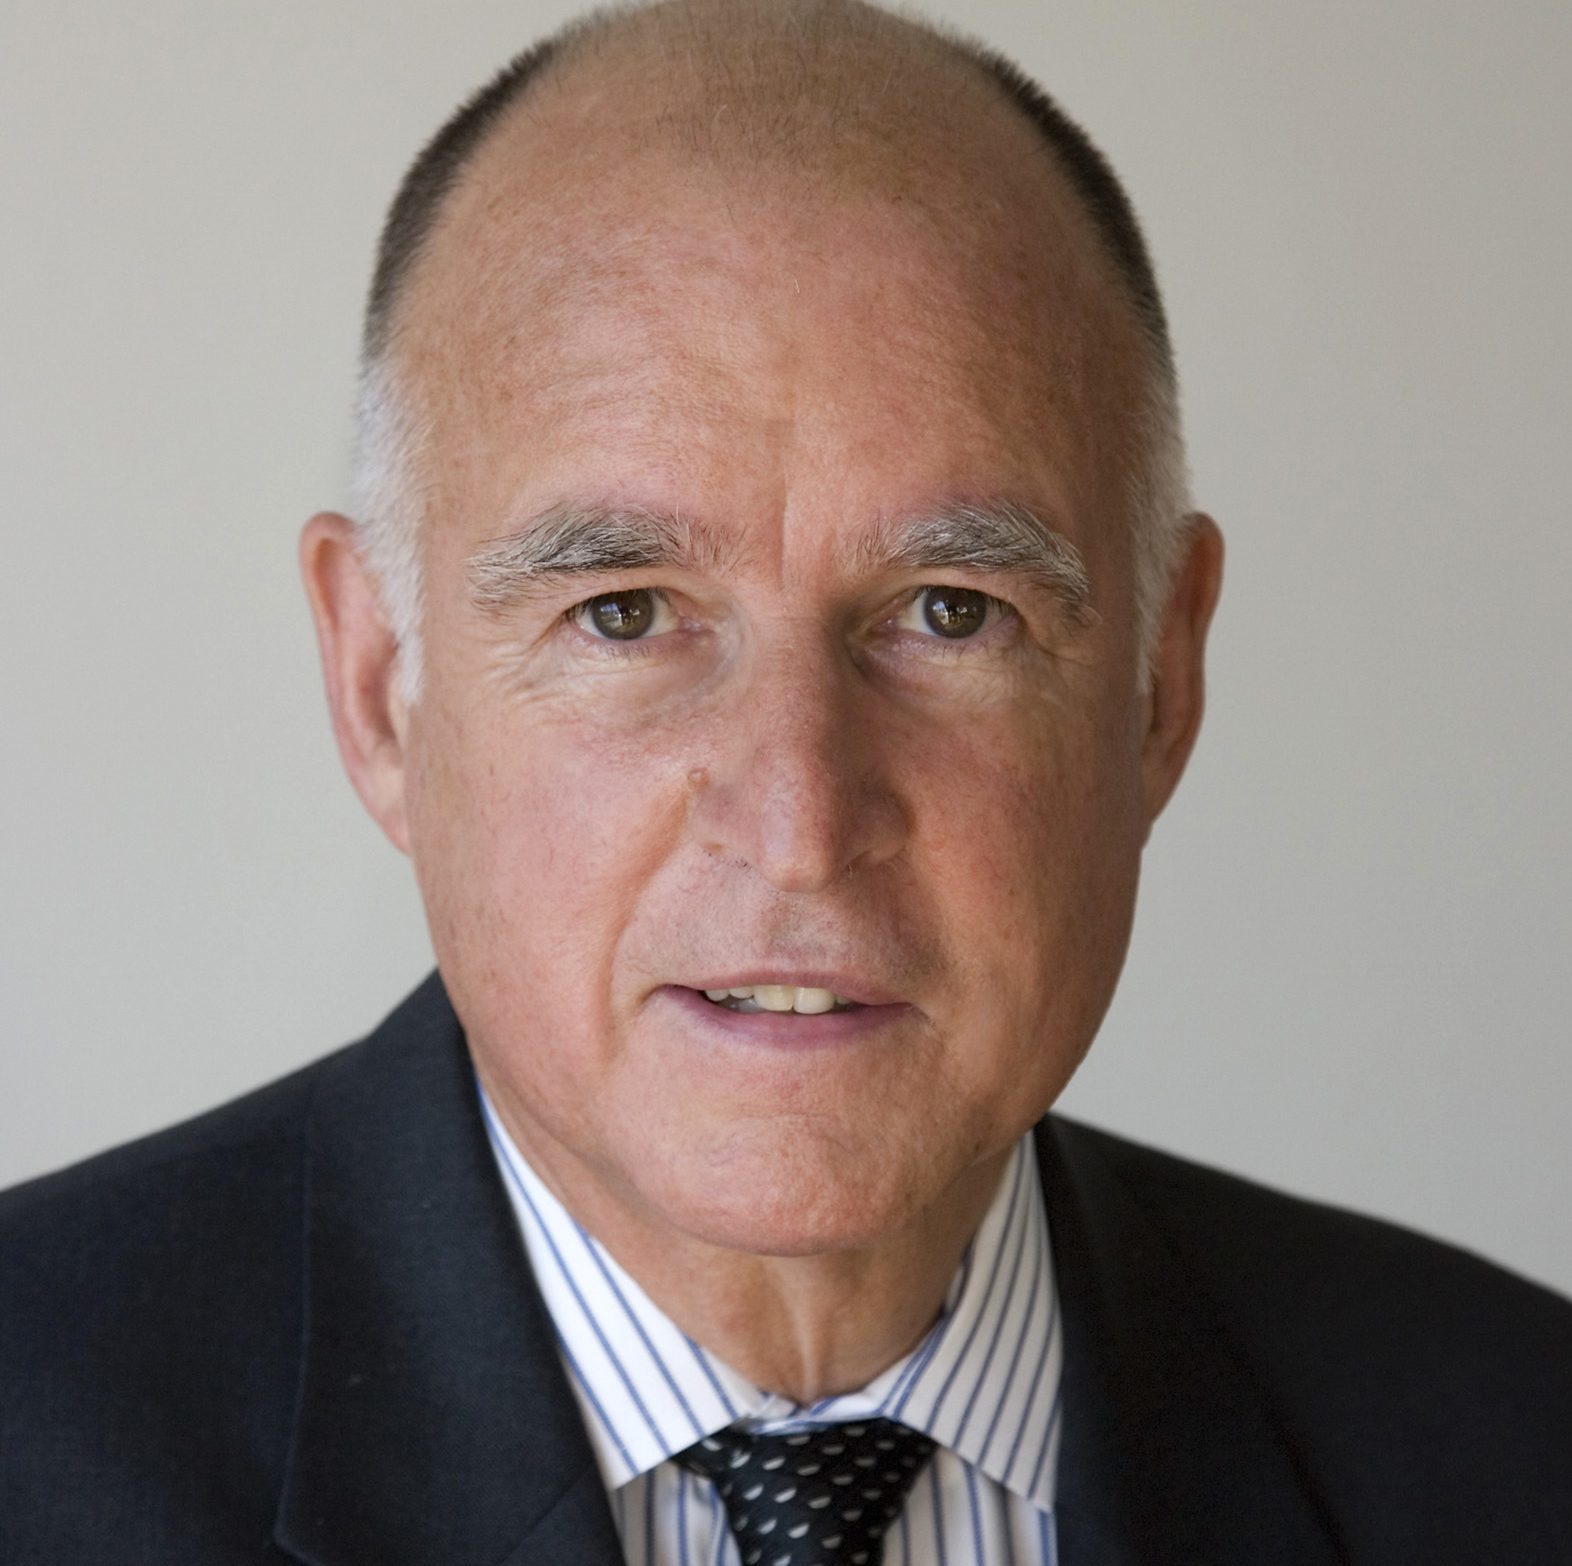 Californian governor Jerry Brown